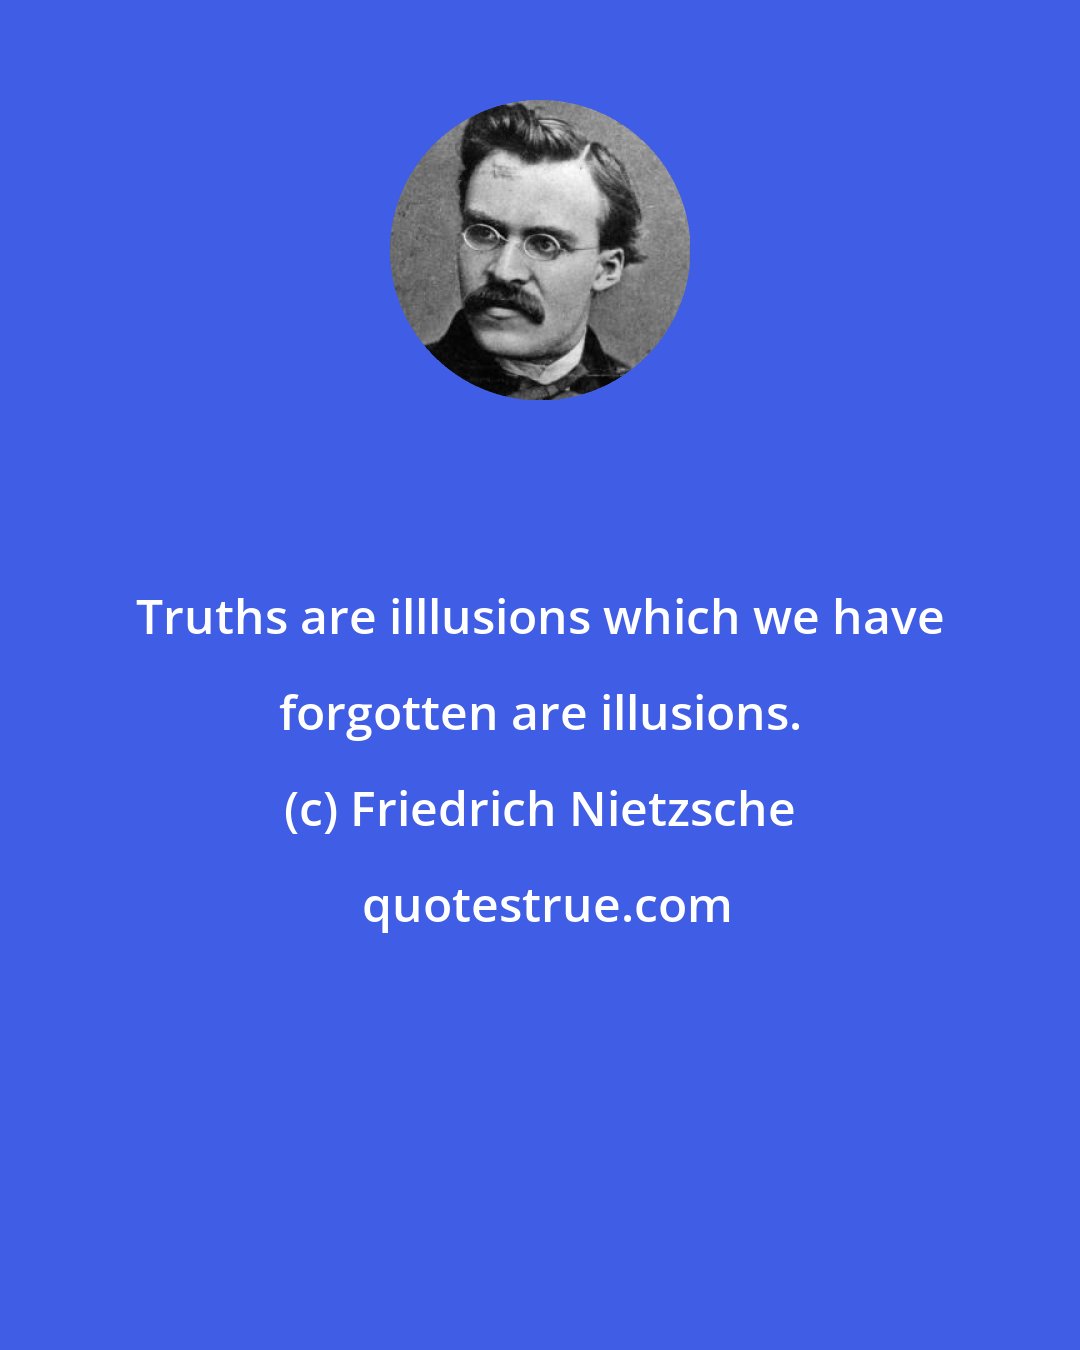 Friedrich Nietzsche: Truths are illlusions which we have forgotten are illusions.